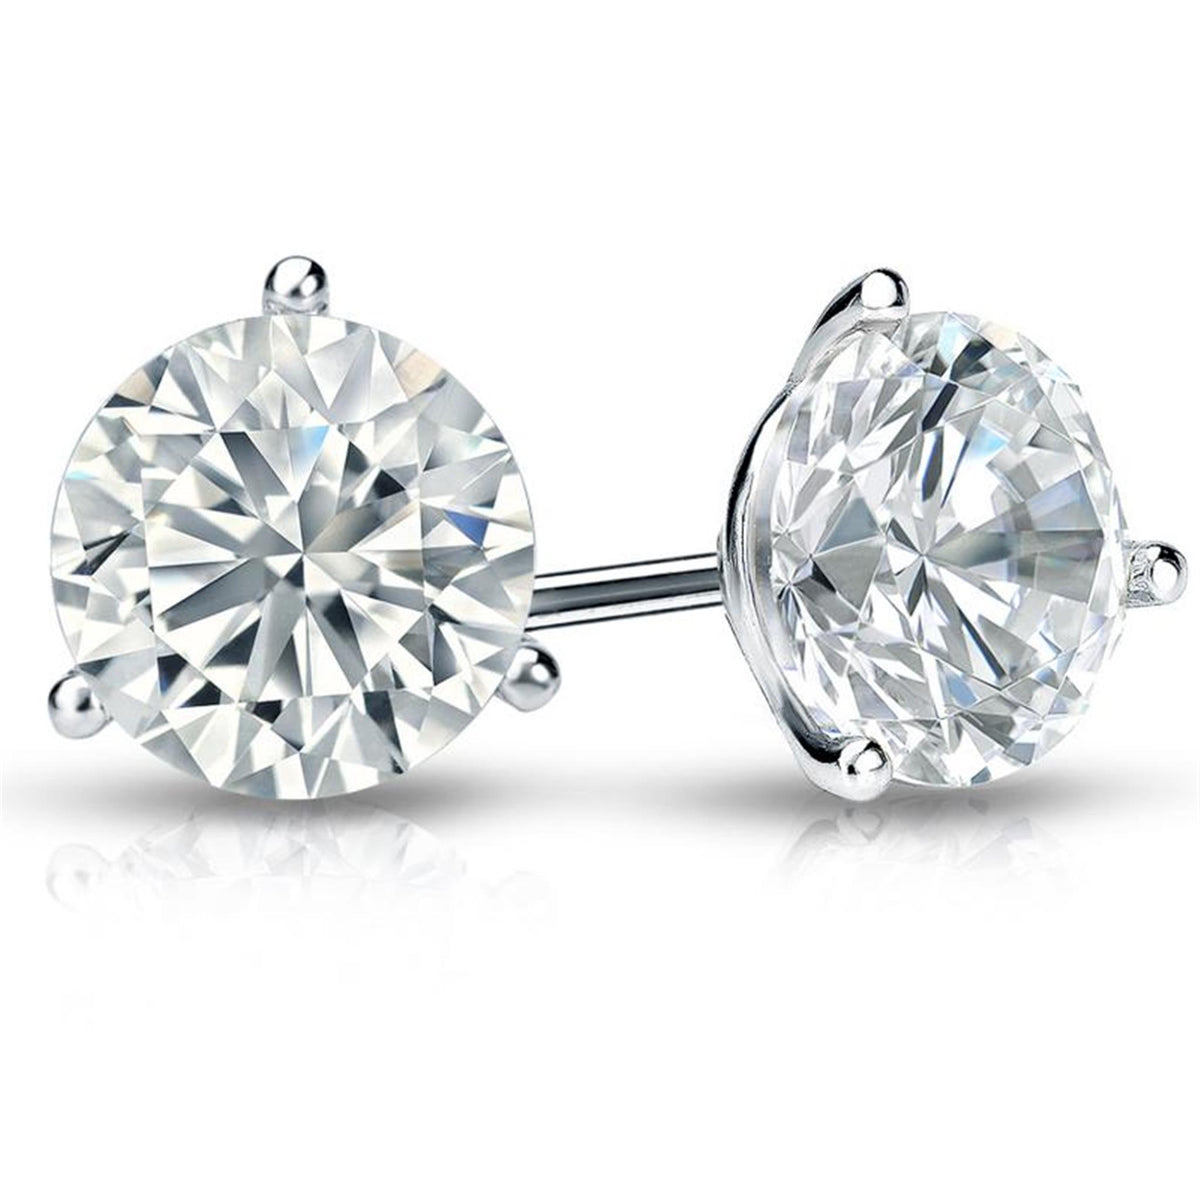 14Kt White Gold Classic Stud Earrings With 2.68cttw Natural Diamonds